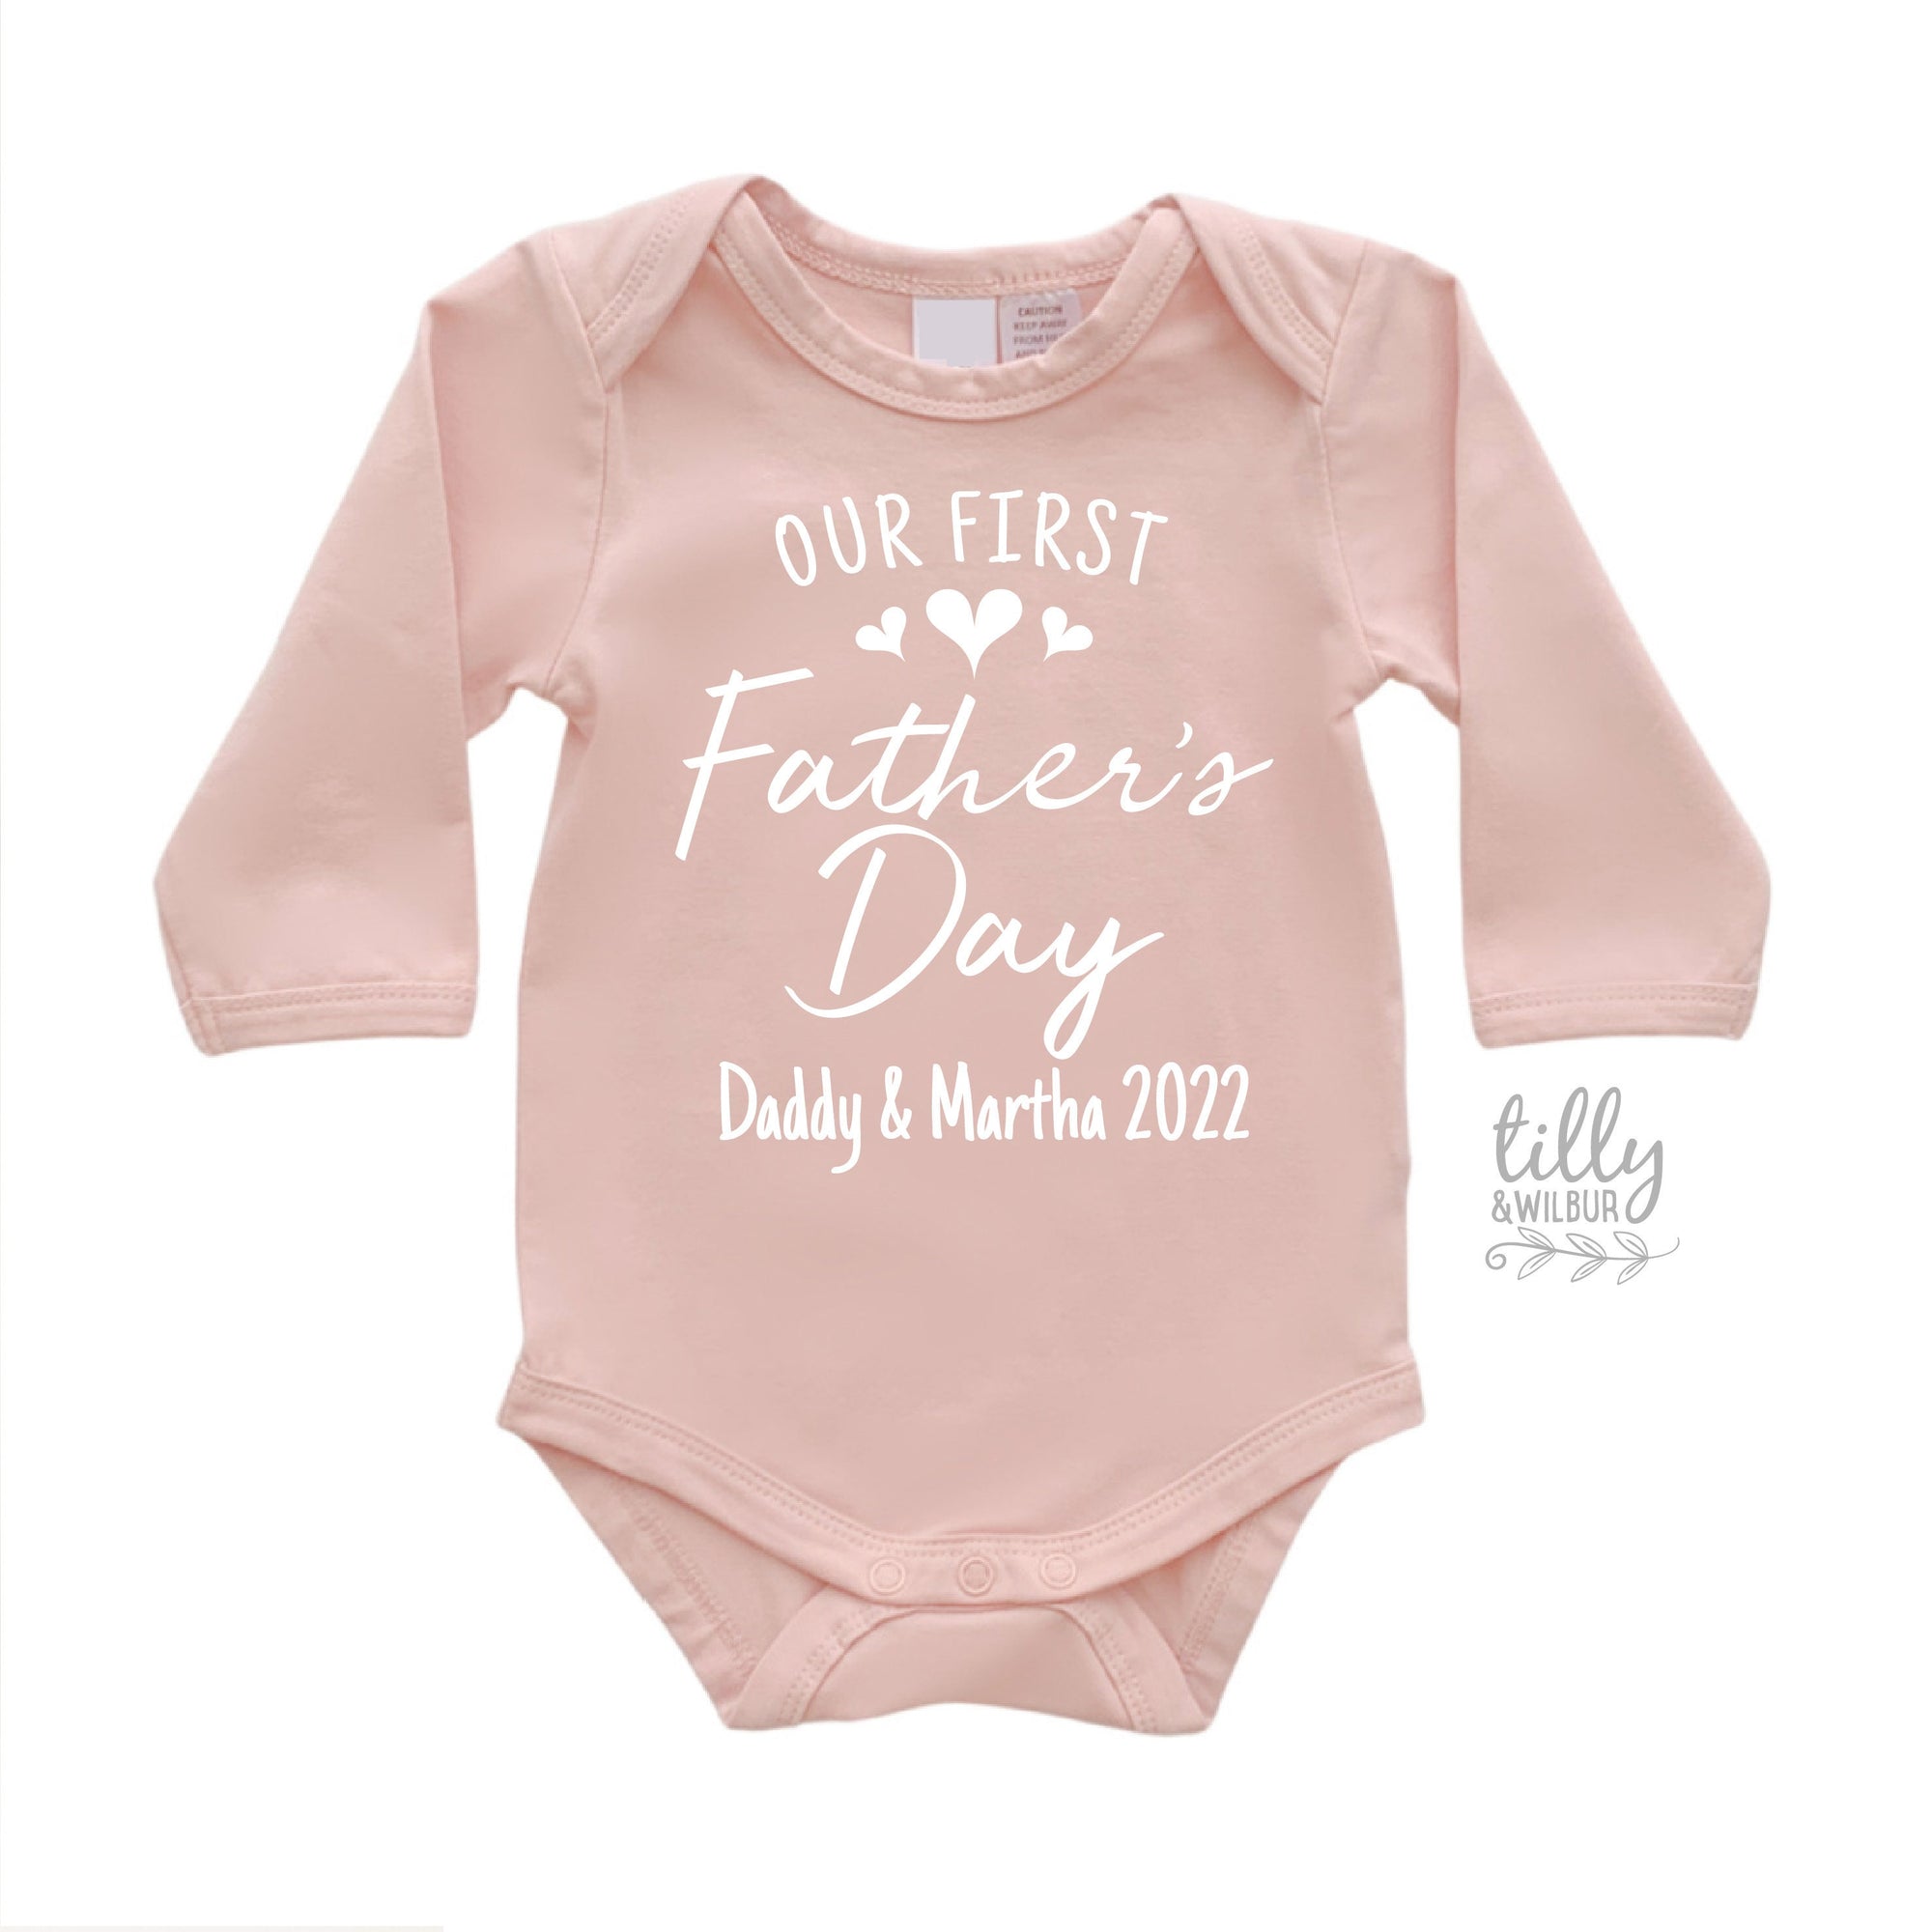 Our First Father's Day 2022 Baby Bodysuit With Names, I Love You Daddy Happy 1st Father's Day, Fathers Day Baby, First Fathers Day Baby Gift